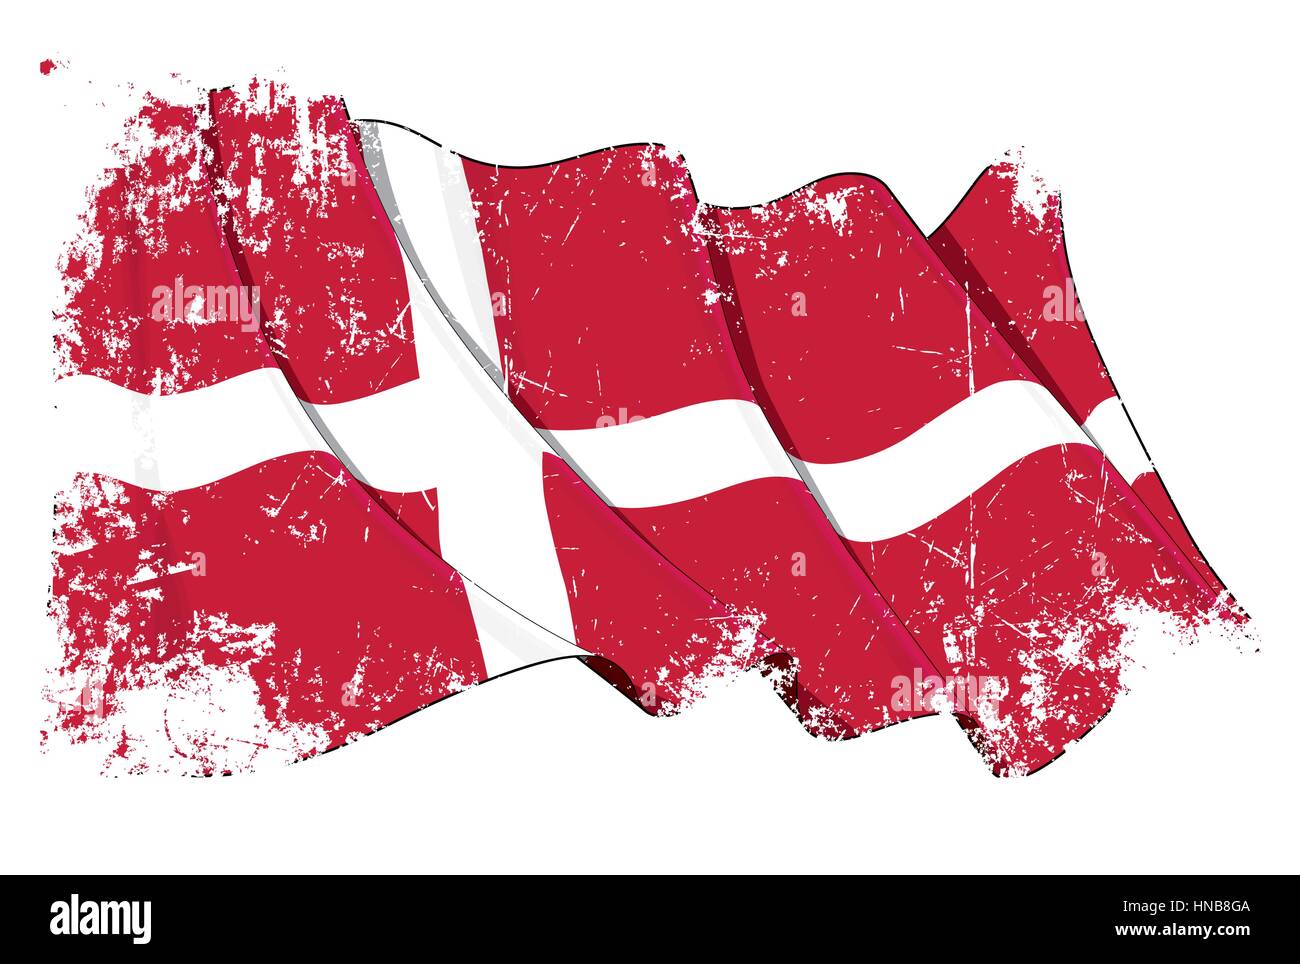 Grunge Vector Illustration of a waving Danish flag. All elements neatly organized. Texture, Lines, Shading & Flag Colors on separate layers for easy e Stock Vector